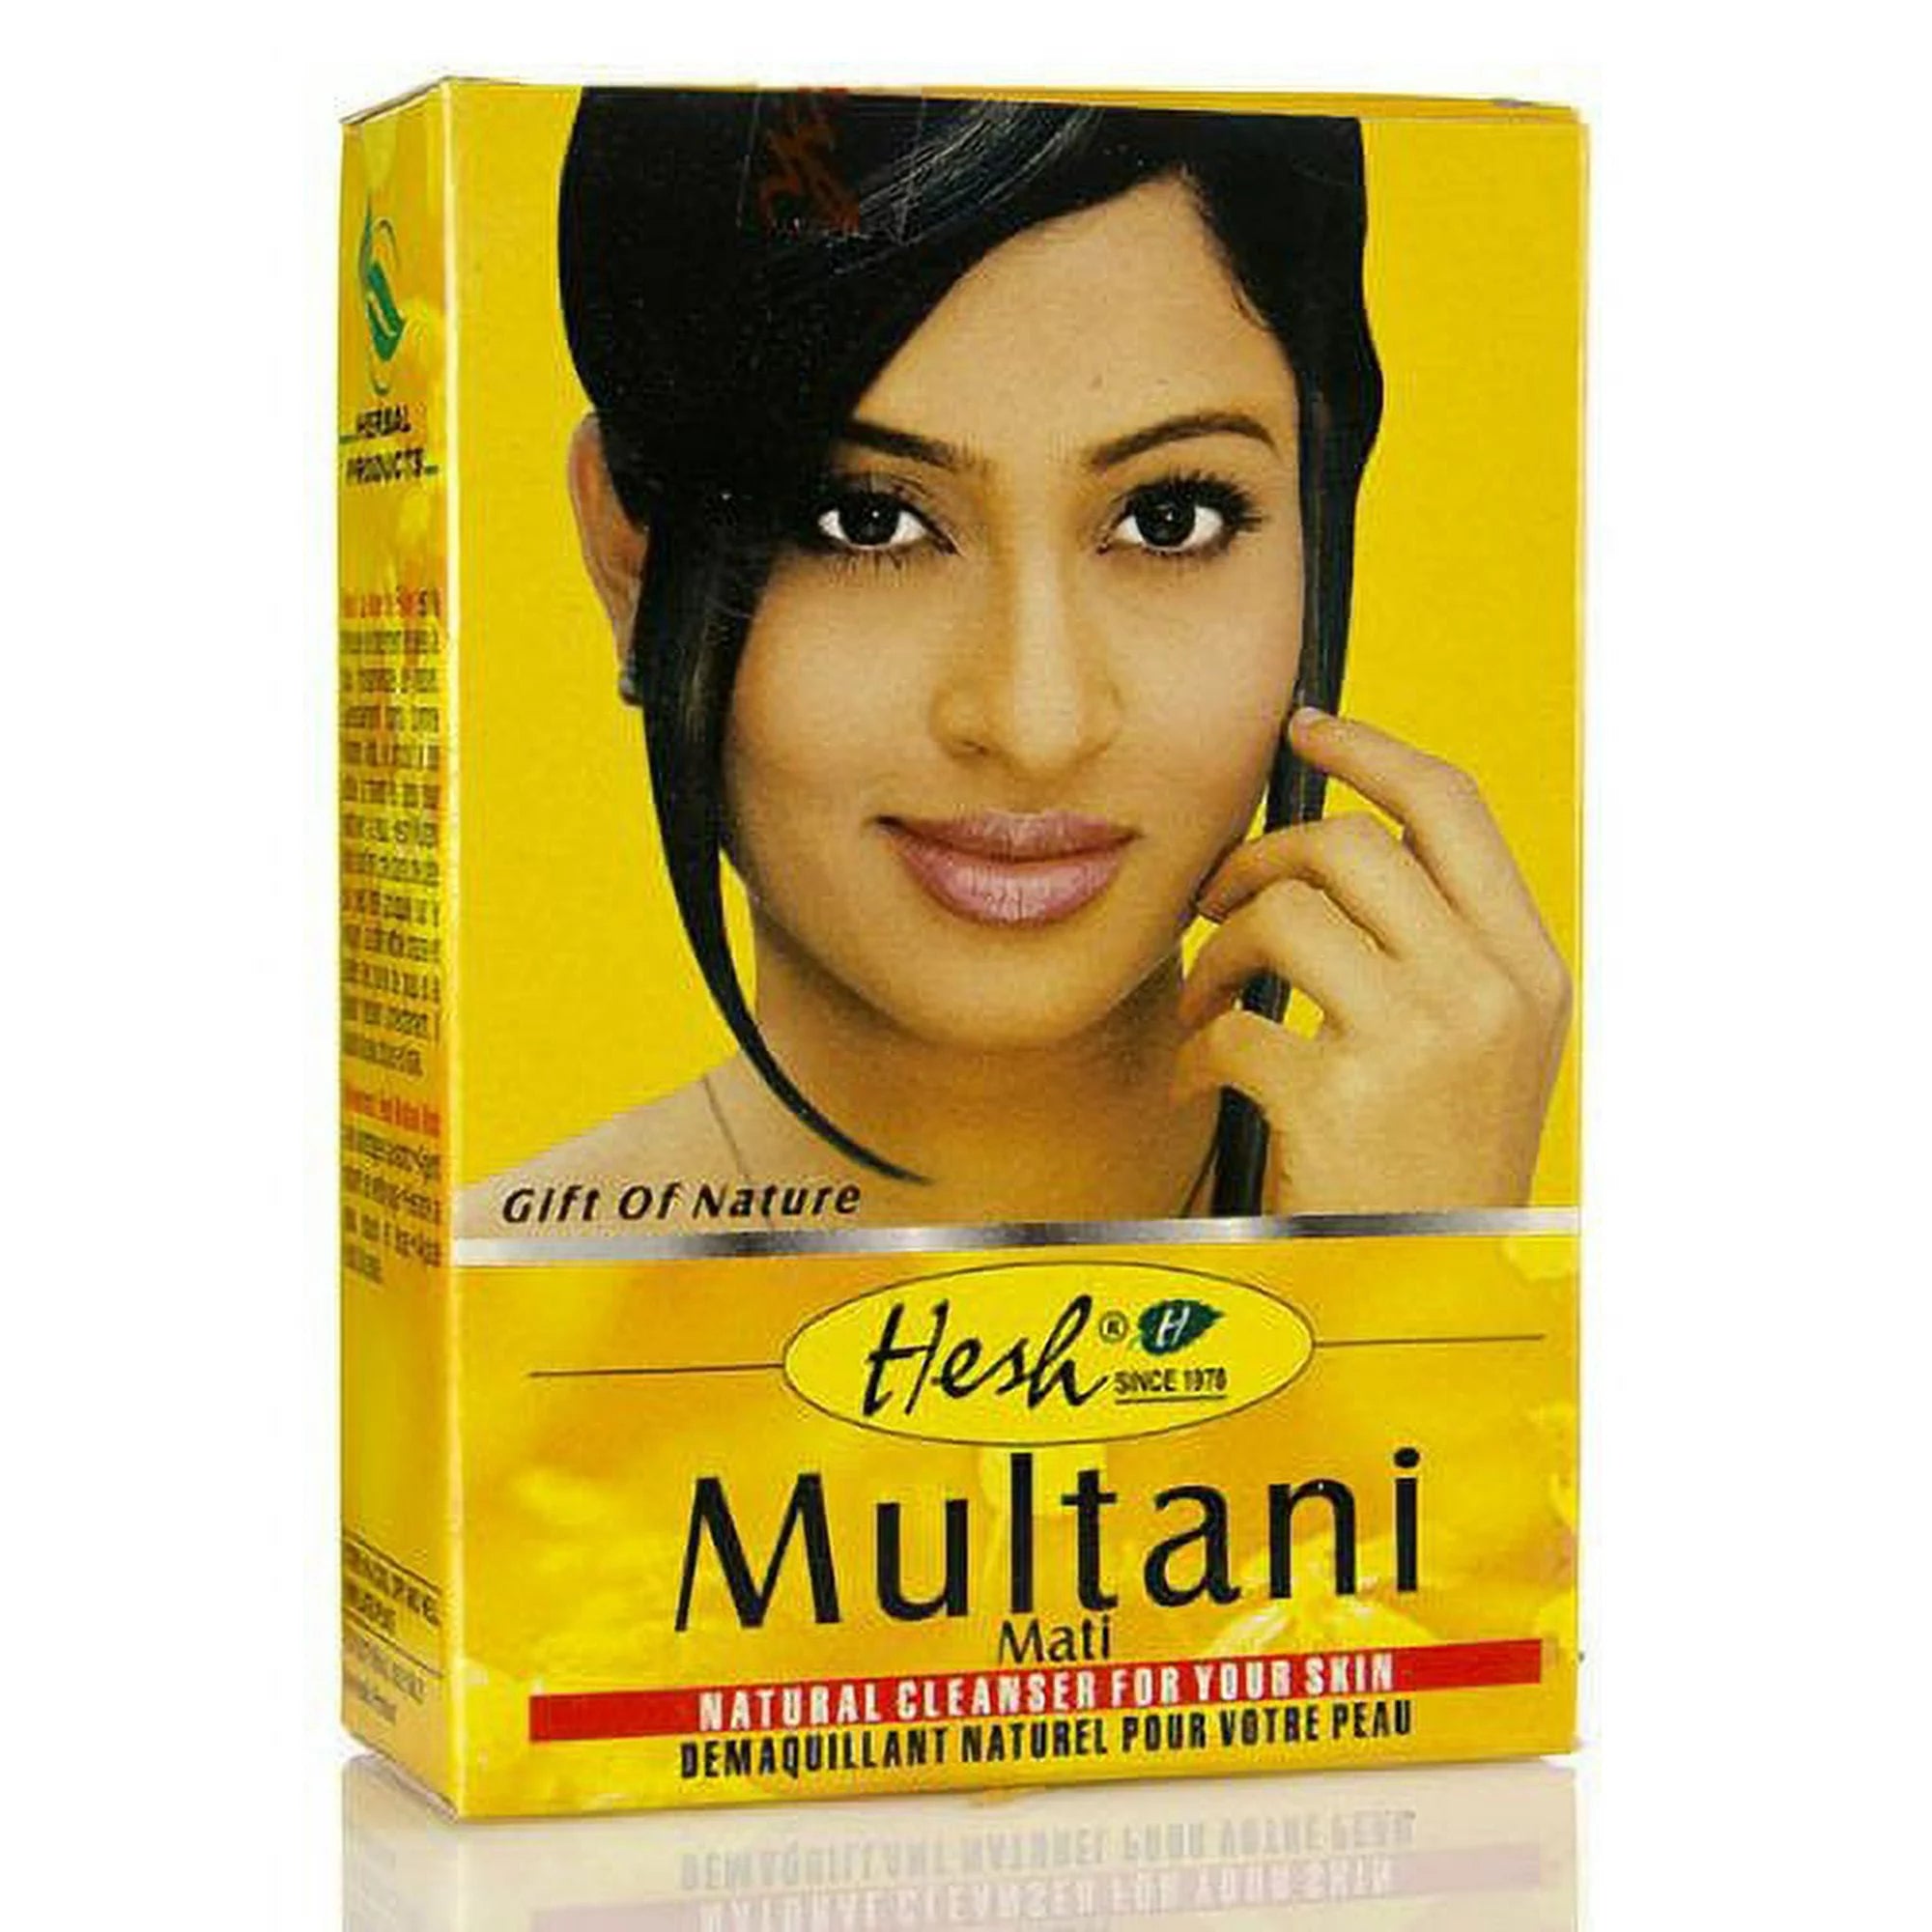 Hesh -Multani Mati 100g Natural Clay Skin and Face Cleanser Mask